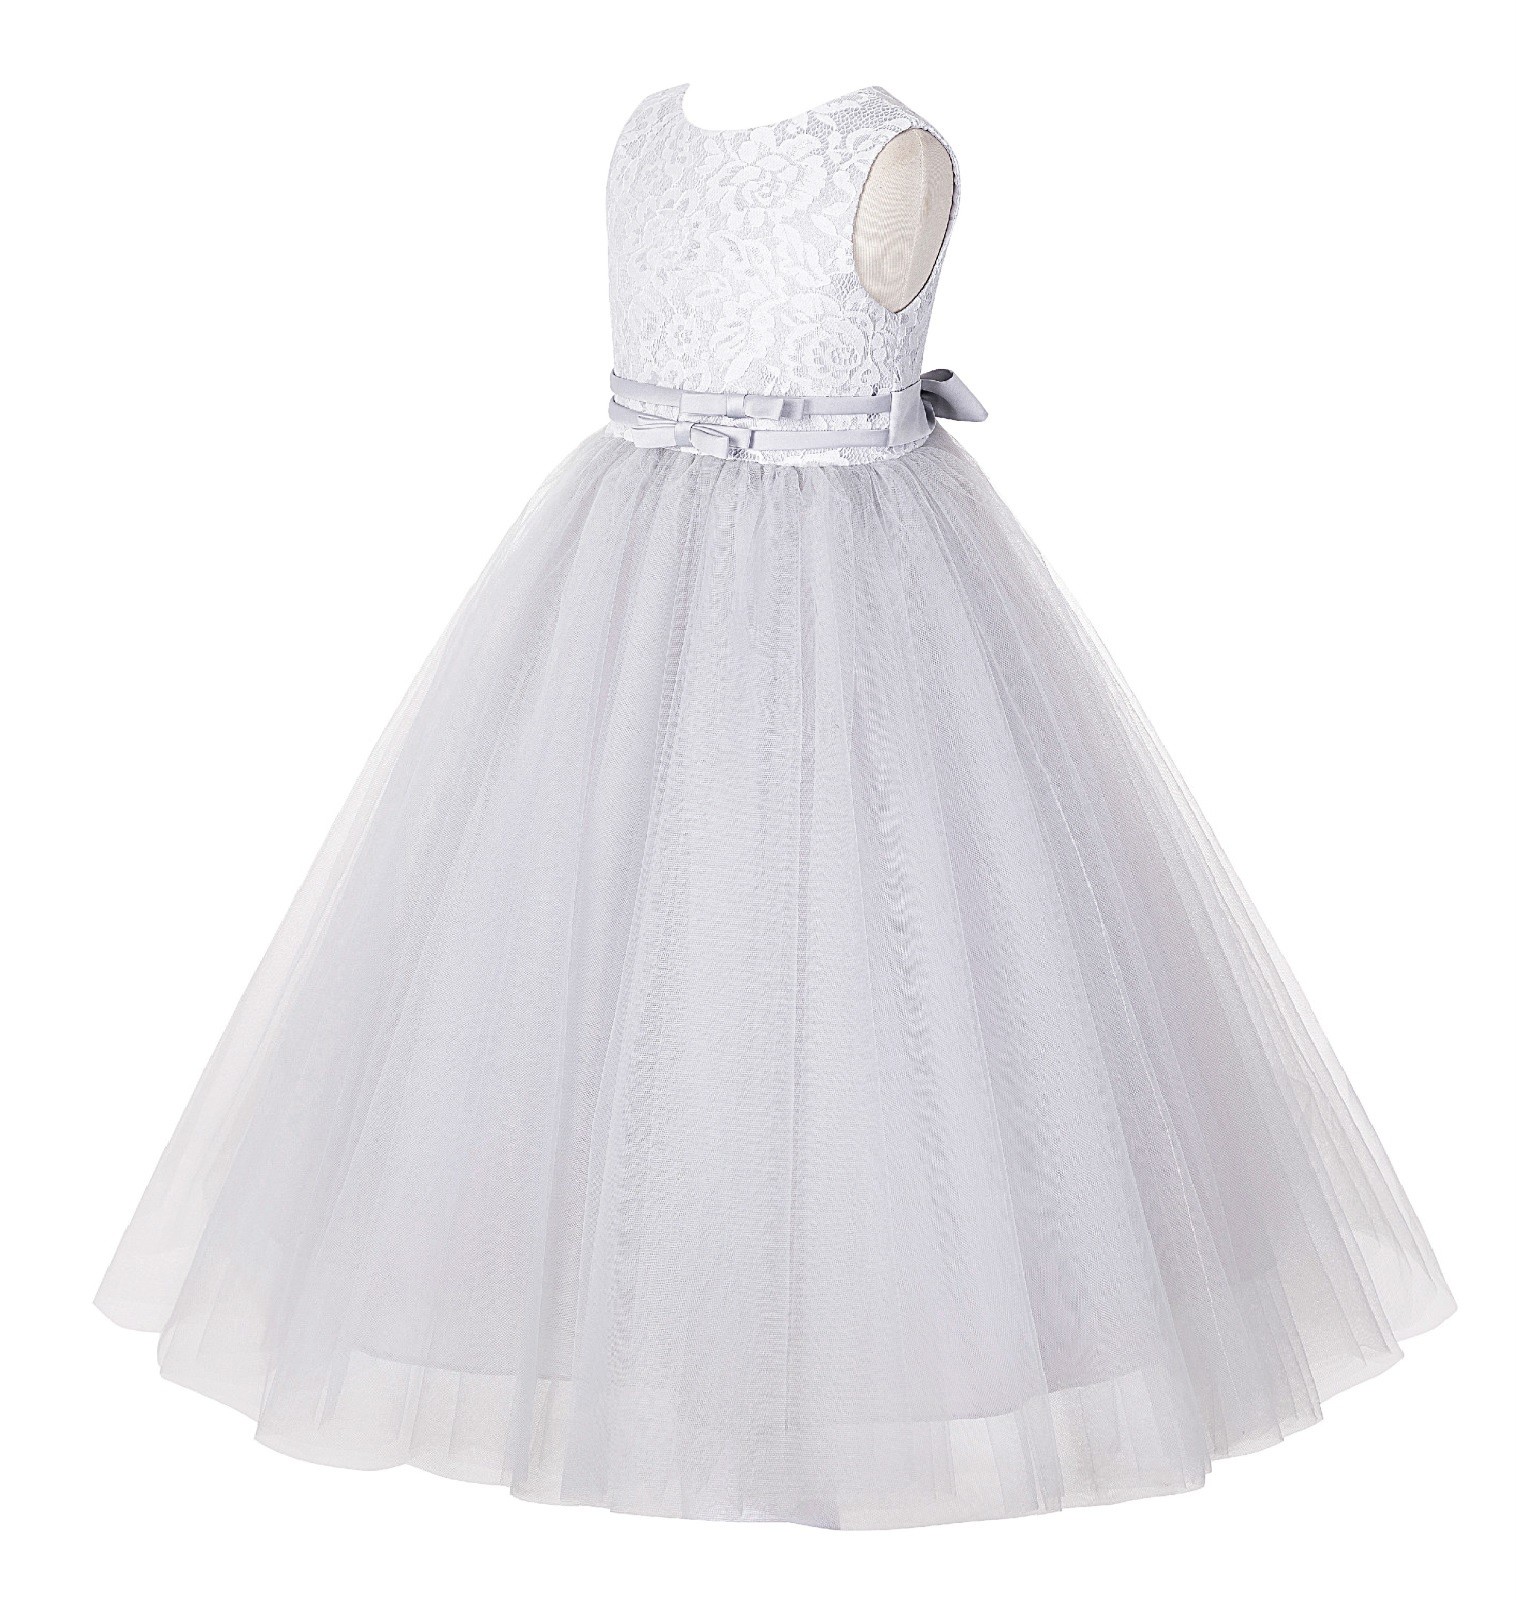 Silver Lace Tulle Tutu Flower Girl Dress 188